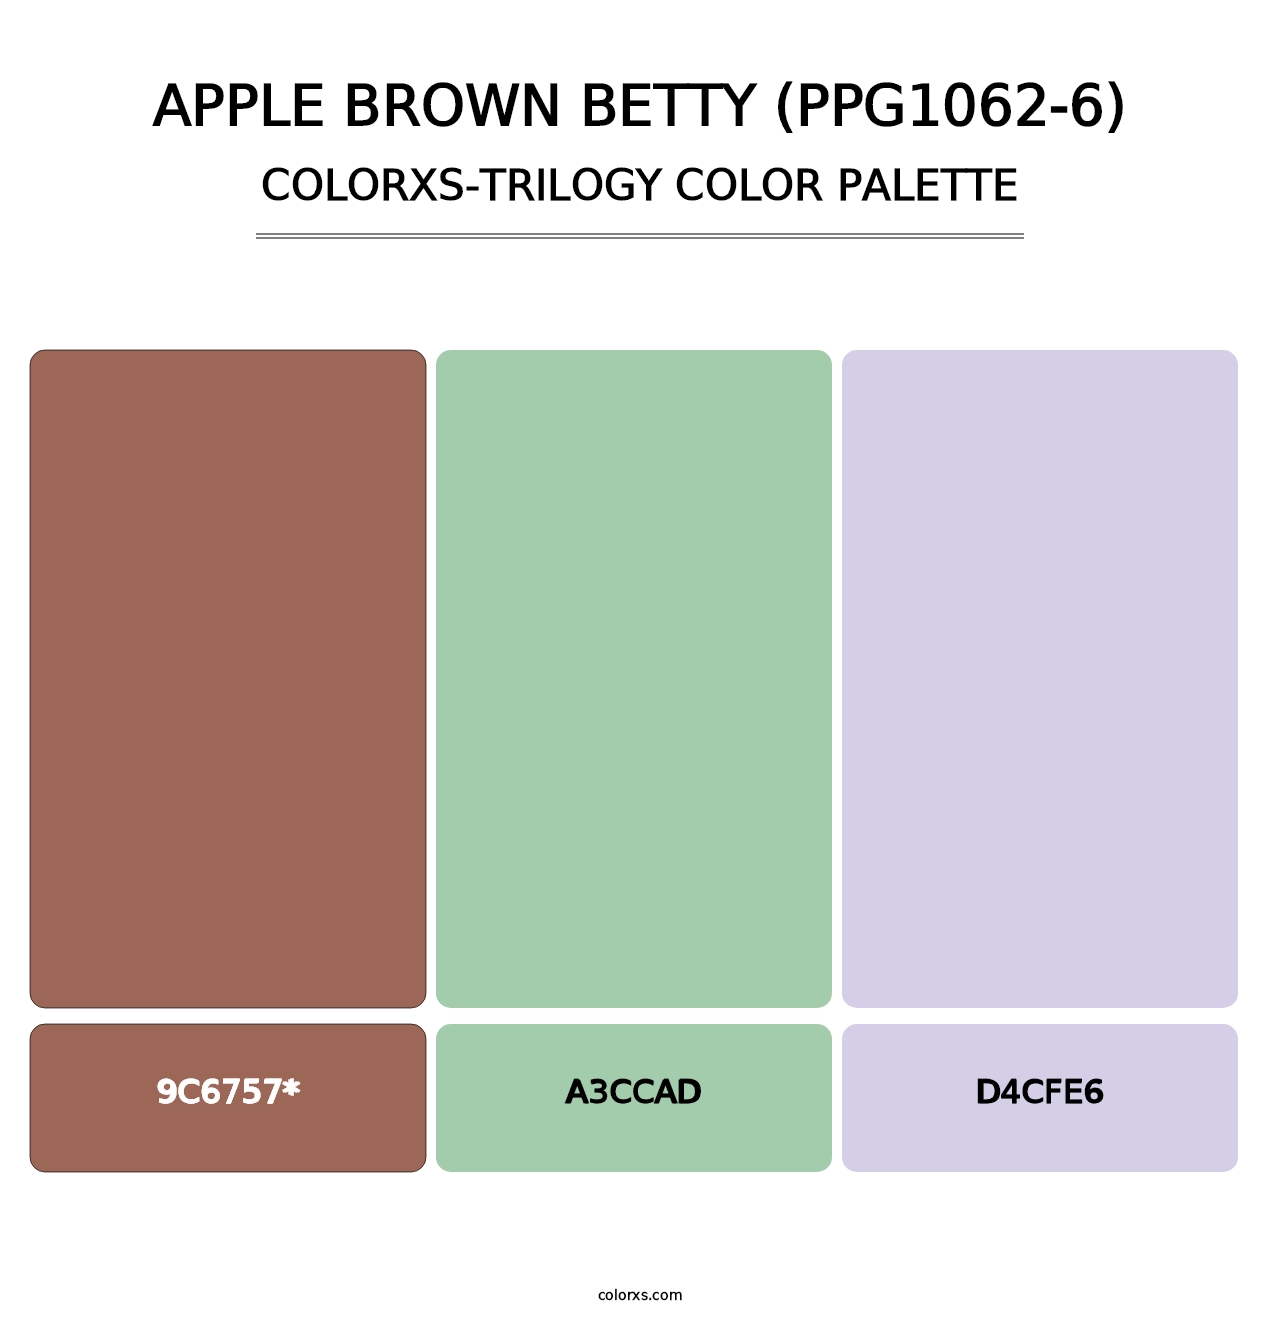 Apple Brown Betty (PPG1062-6) - Colorxs Trilogy Palette